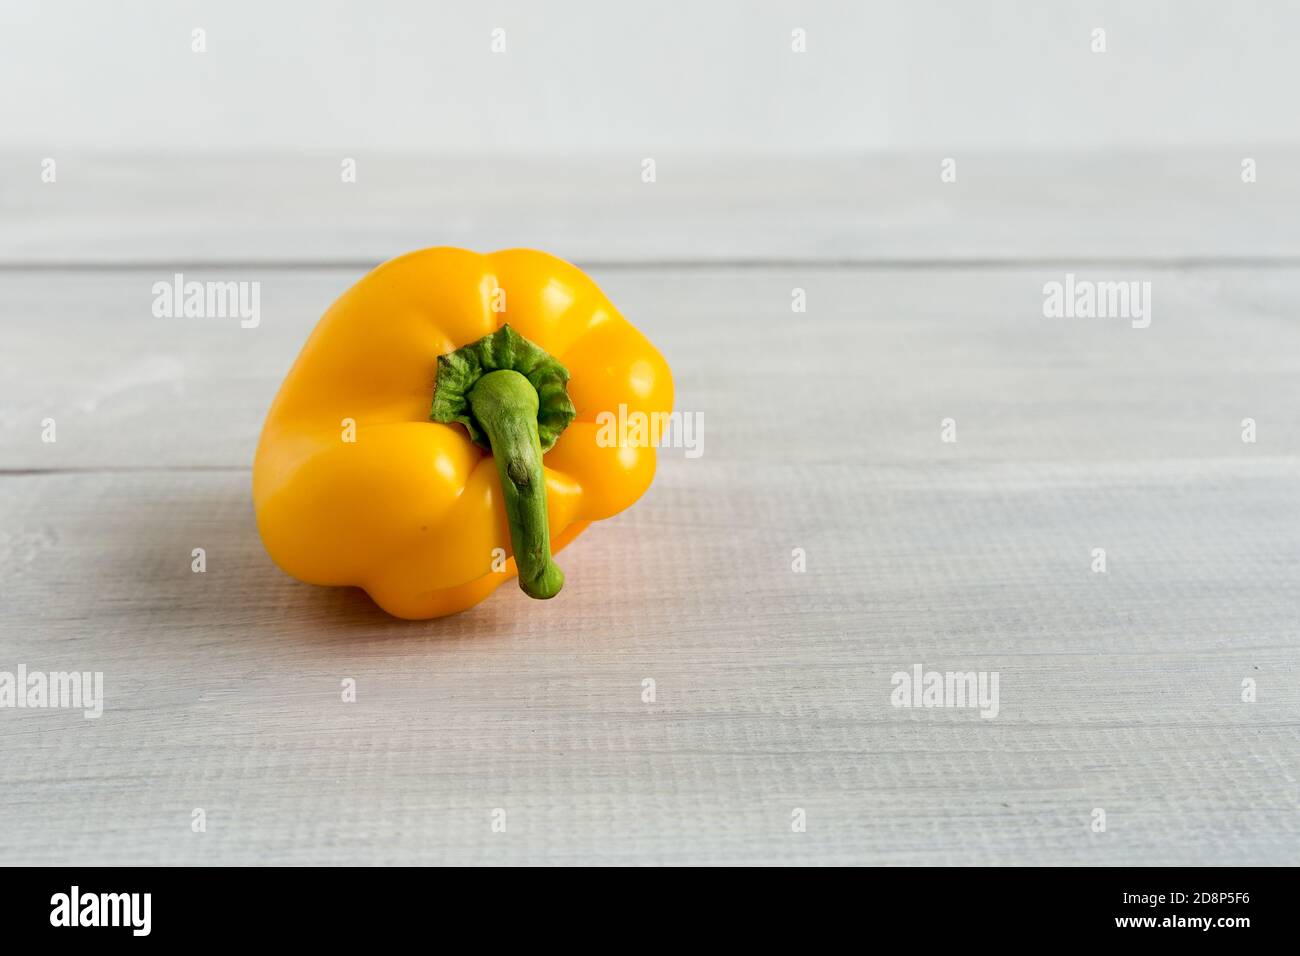 Ugly, deformed, yellow bell pepper isolated on the wooden white background. Strange, funny, imperfect shaped organic vegetable. Food waste problem con Stock Photo